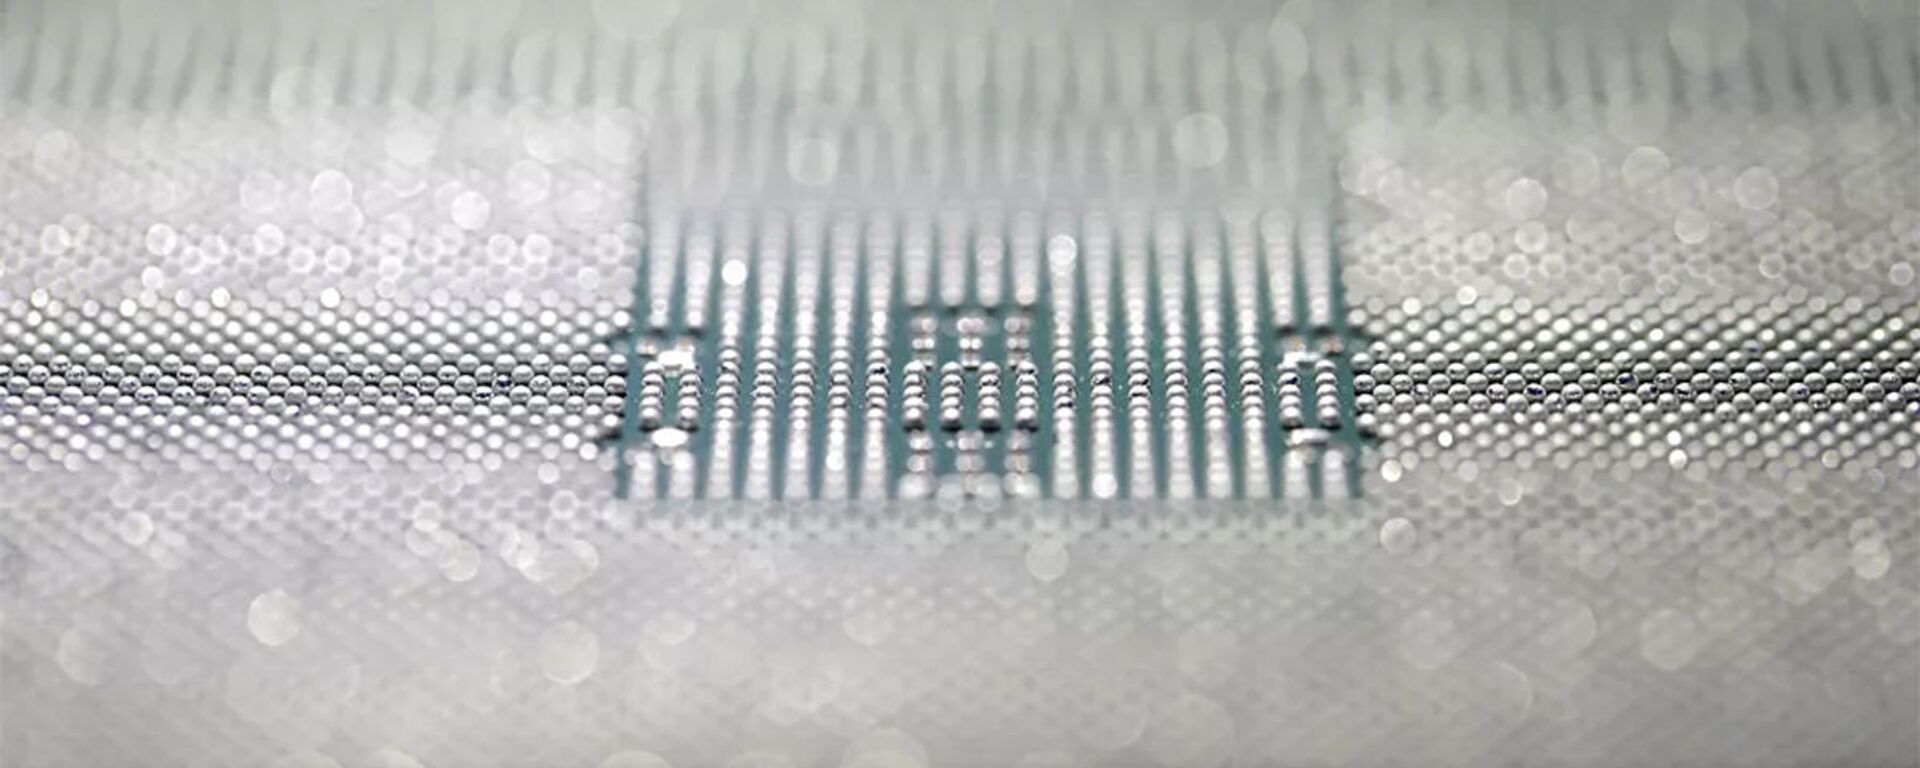 A Kunpeng 920 chip is displayed during an unveiling ceremony in Shenzhen, China, Monday, Jan. 7, 2019. Chinese telecom giant Huawei unveiled a processor chip for data centers and cloud computing as it expands into an emerging global market despite Western warnings the company might be a security risk.  - 俄罗斯卫星通讯社, 1920, 10.09.2021